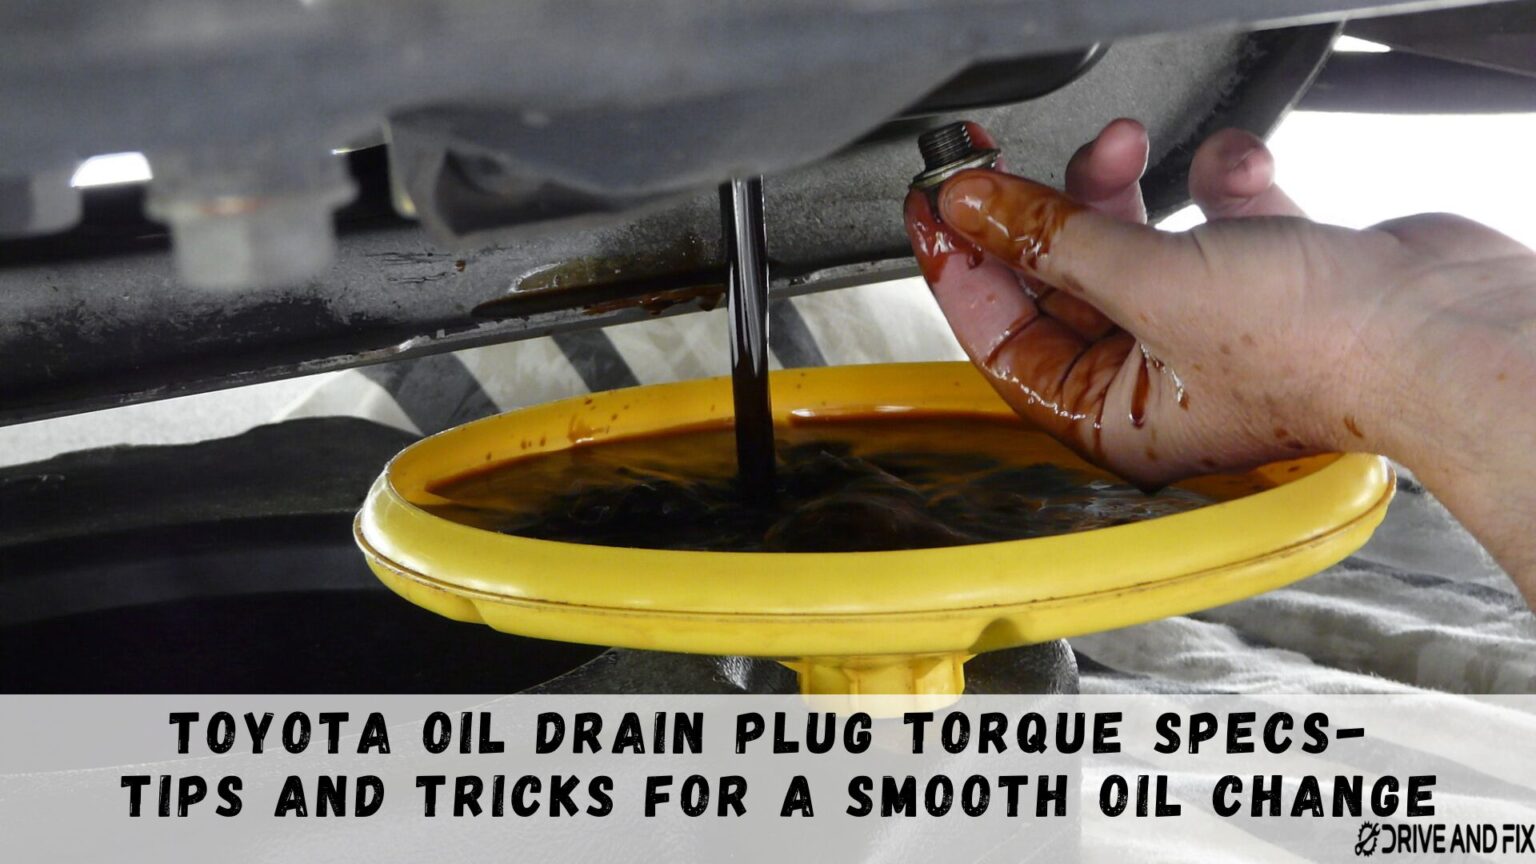 Toyota Oil Drain Plug Torque Specs Tips And Tricks For A Smooth Oil Change